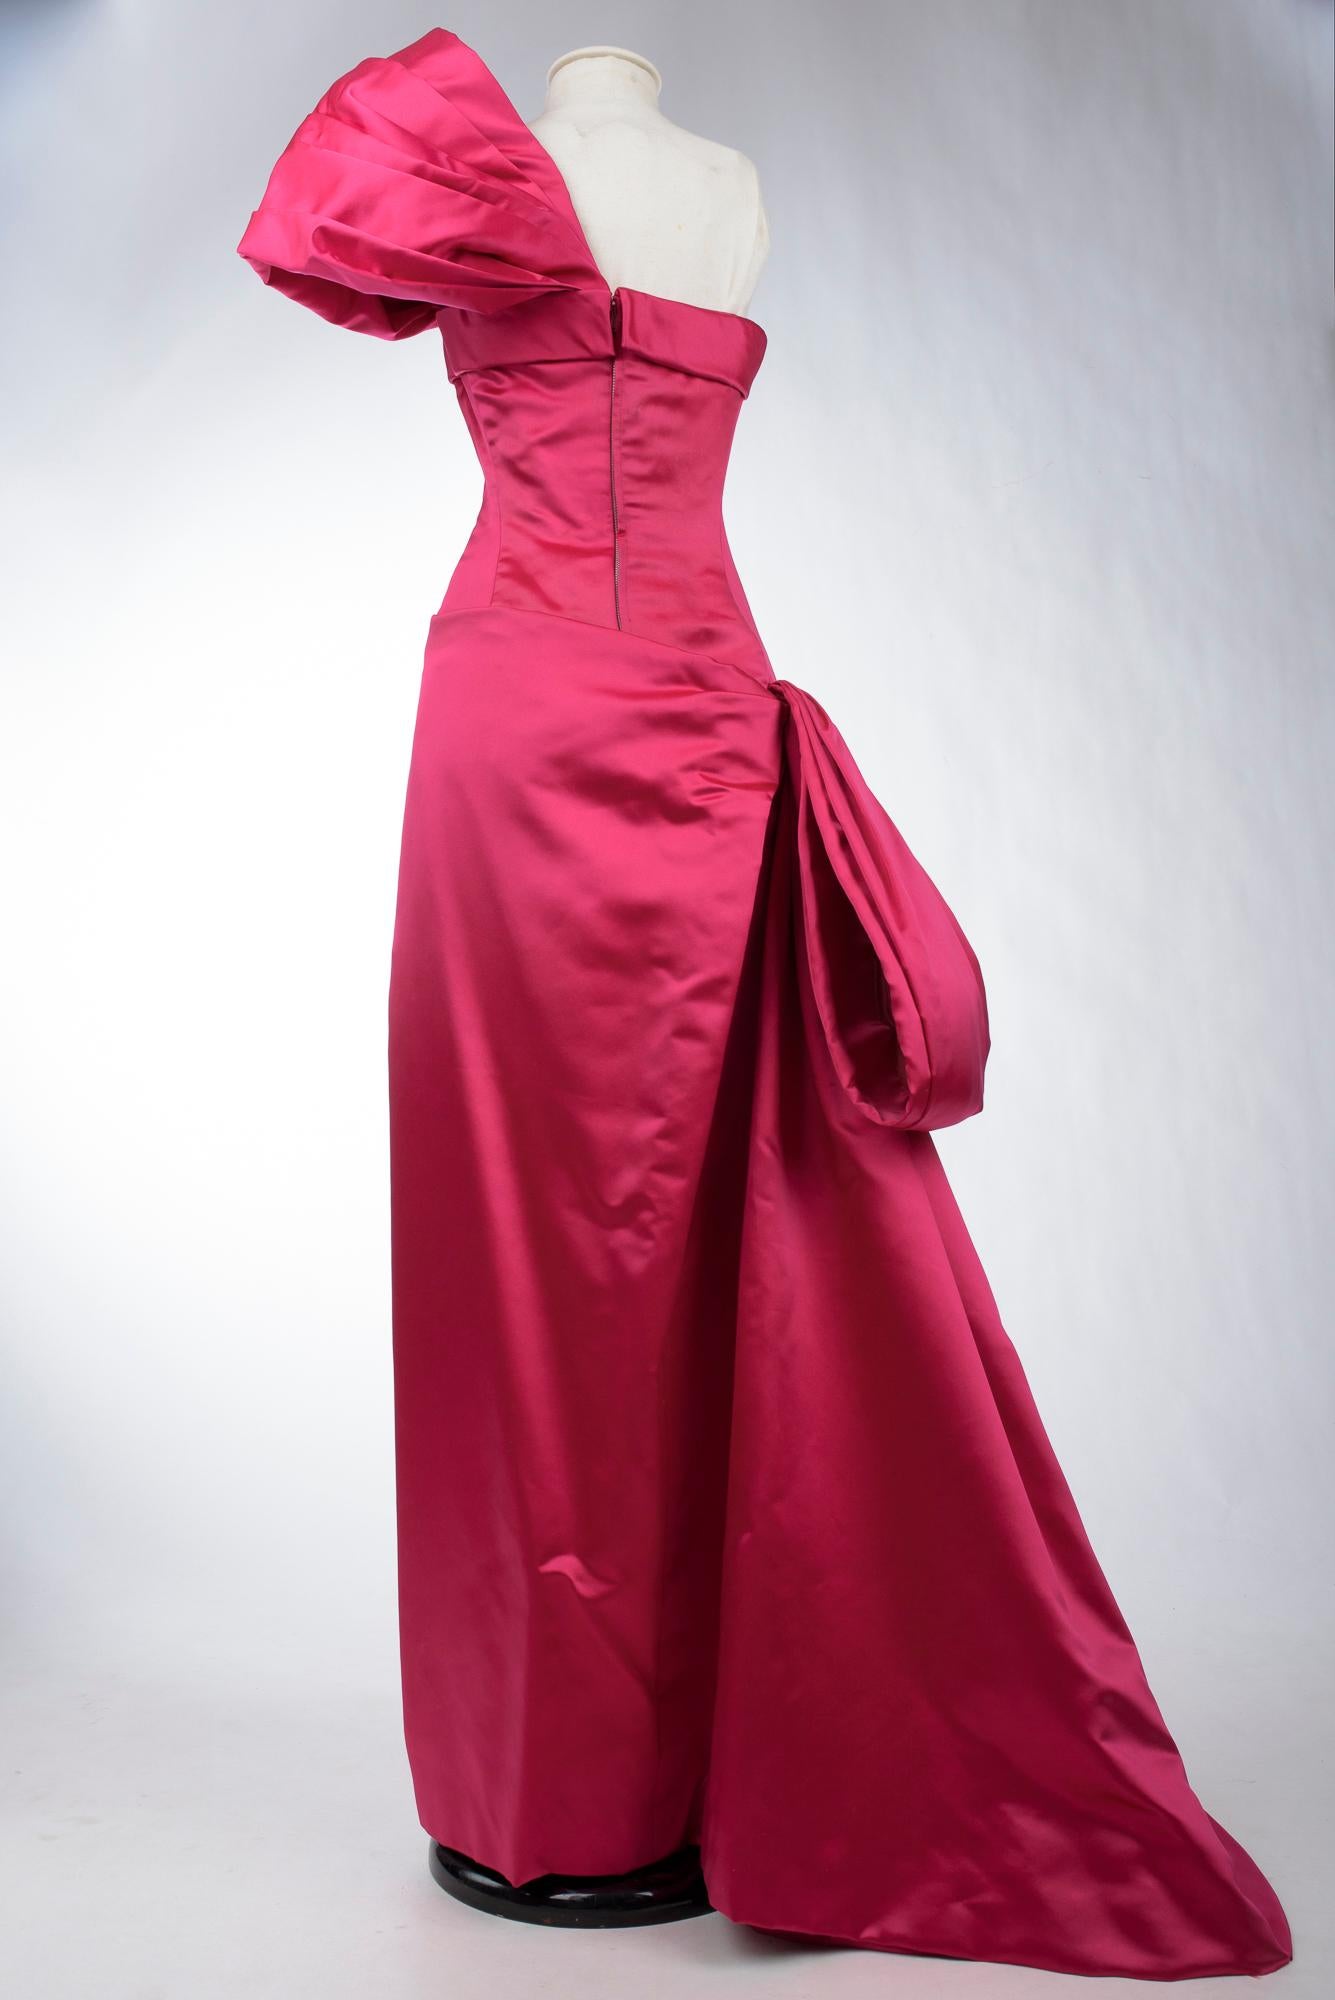 A Christian Dior Haute Couture Evening Dress Numbered 218551 Circa 1959-1965 For Sale 9